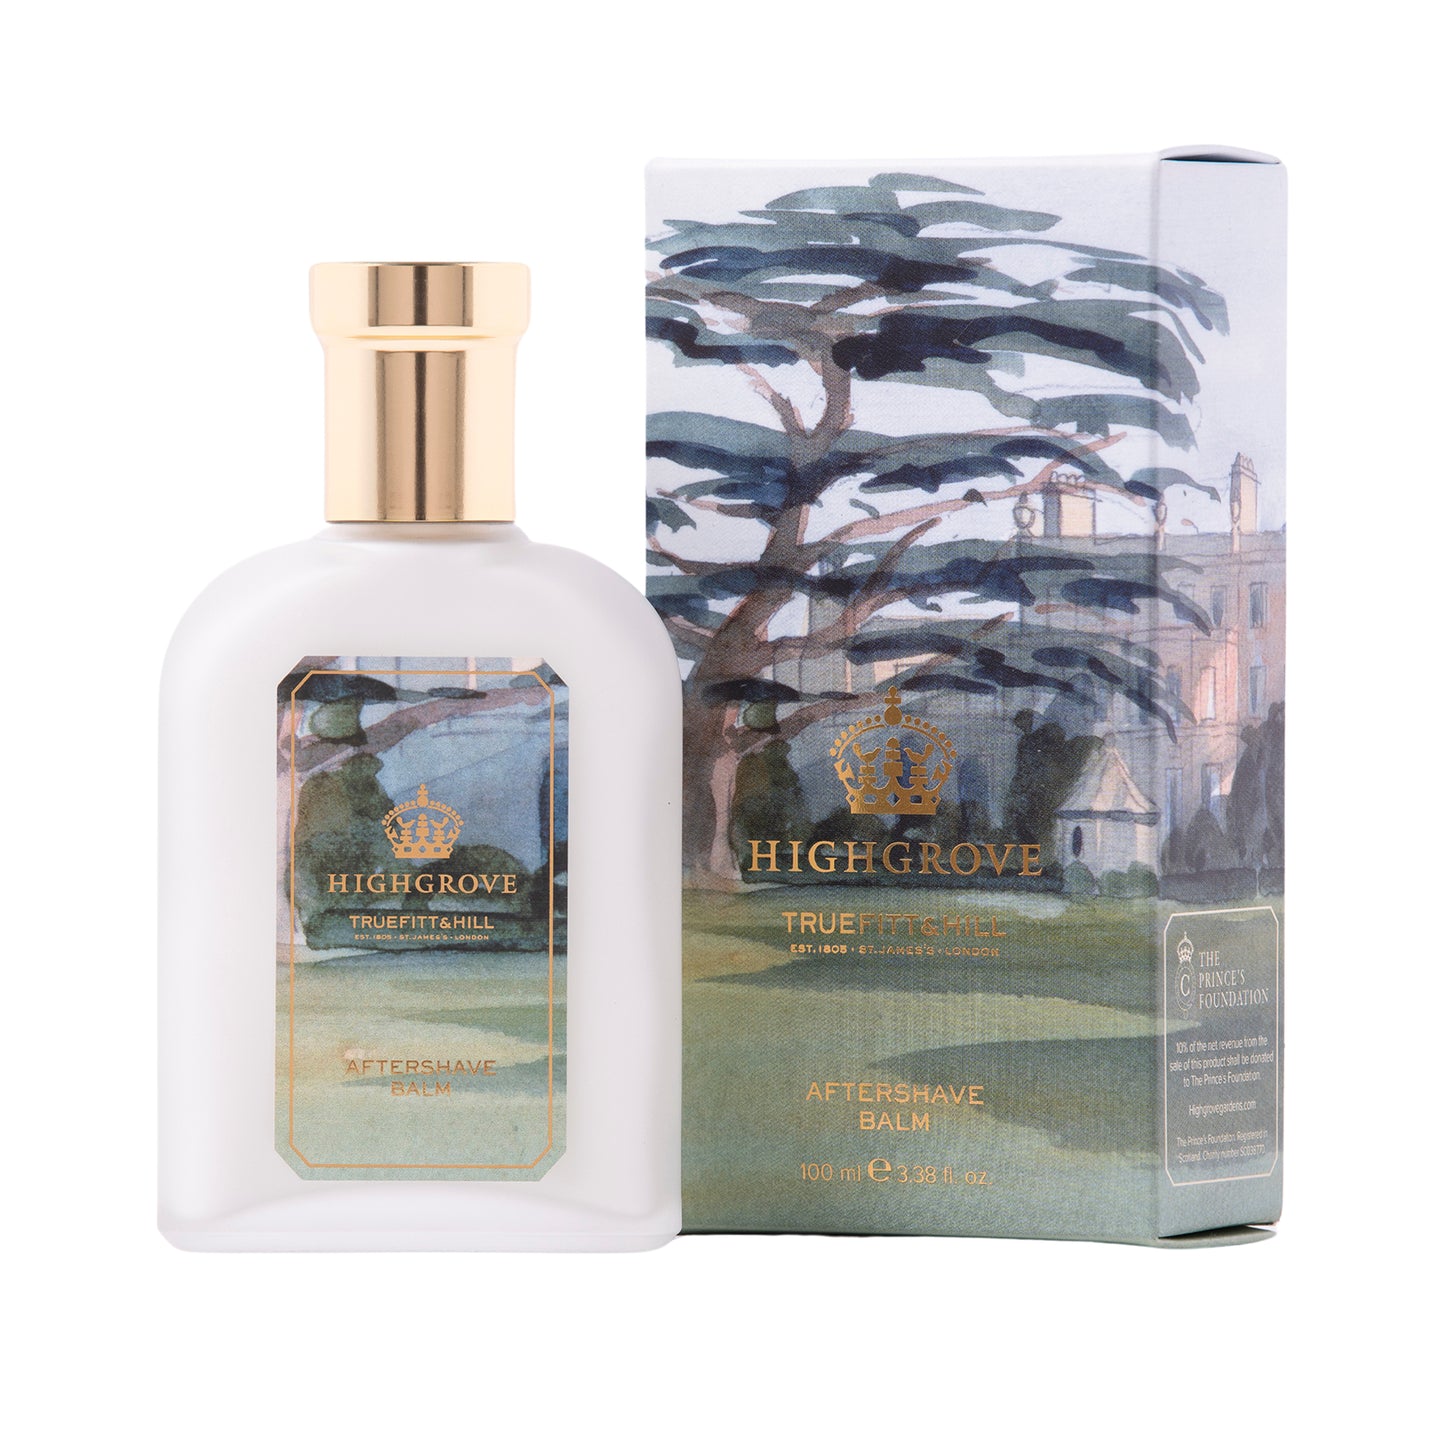 Highgrove Luxury Aftershave Balm